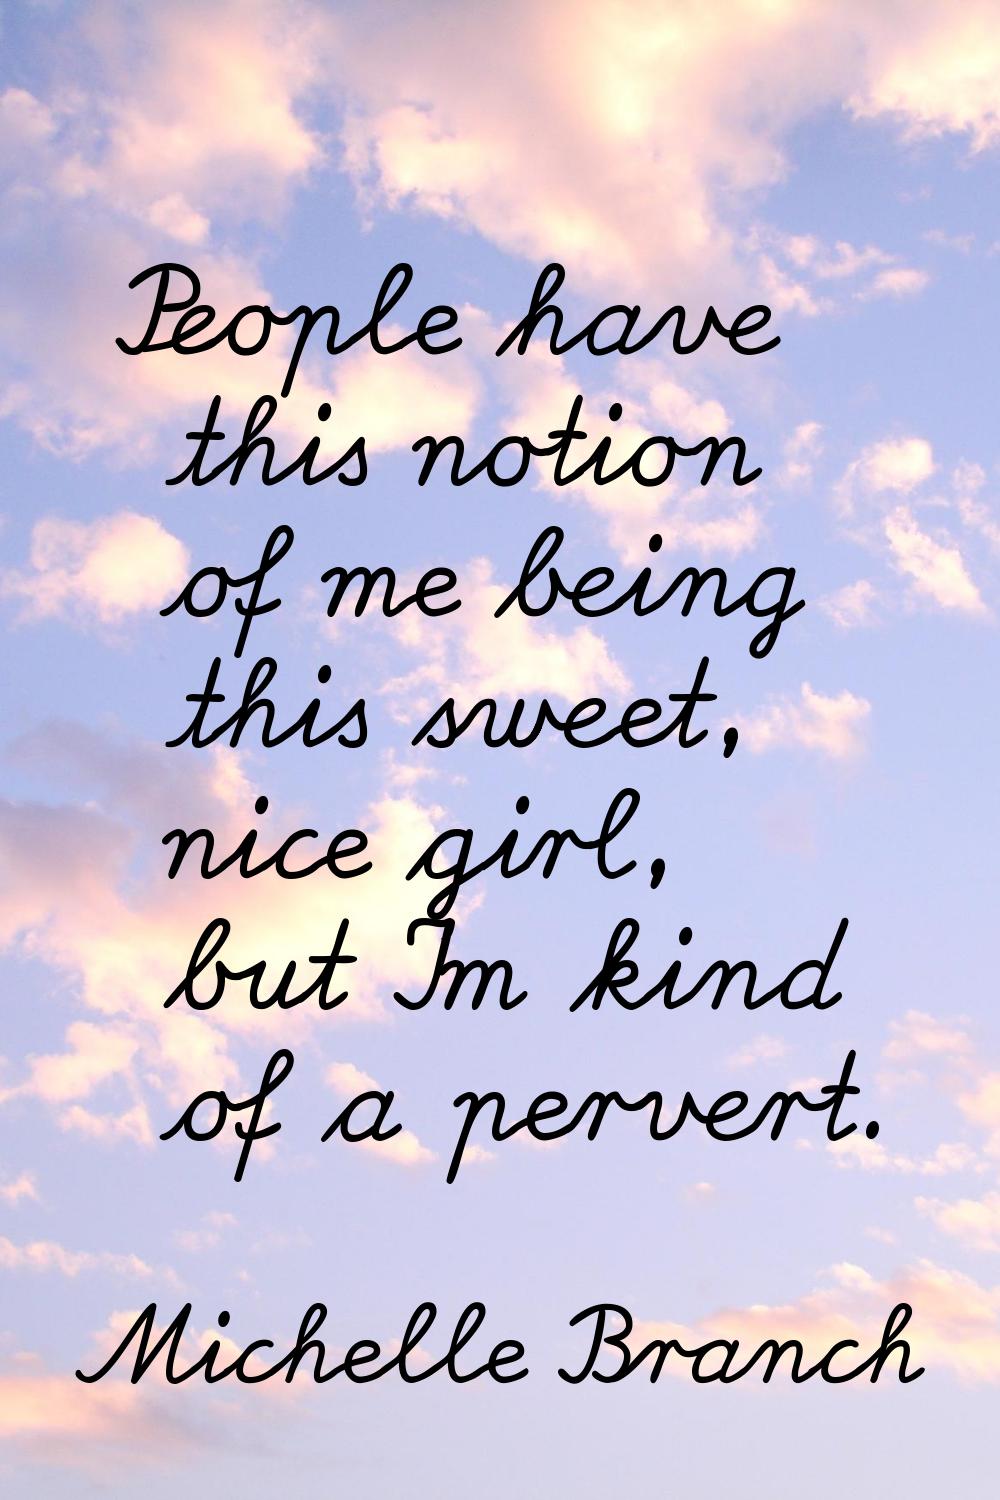 People have this notion of me being this sweet, nice girl, but I'm kind of a pervert.